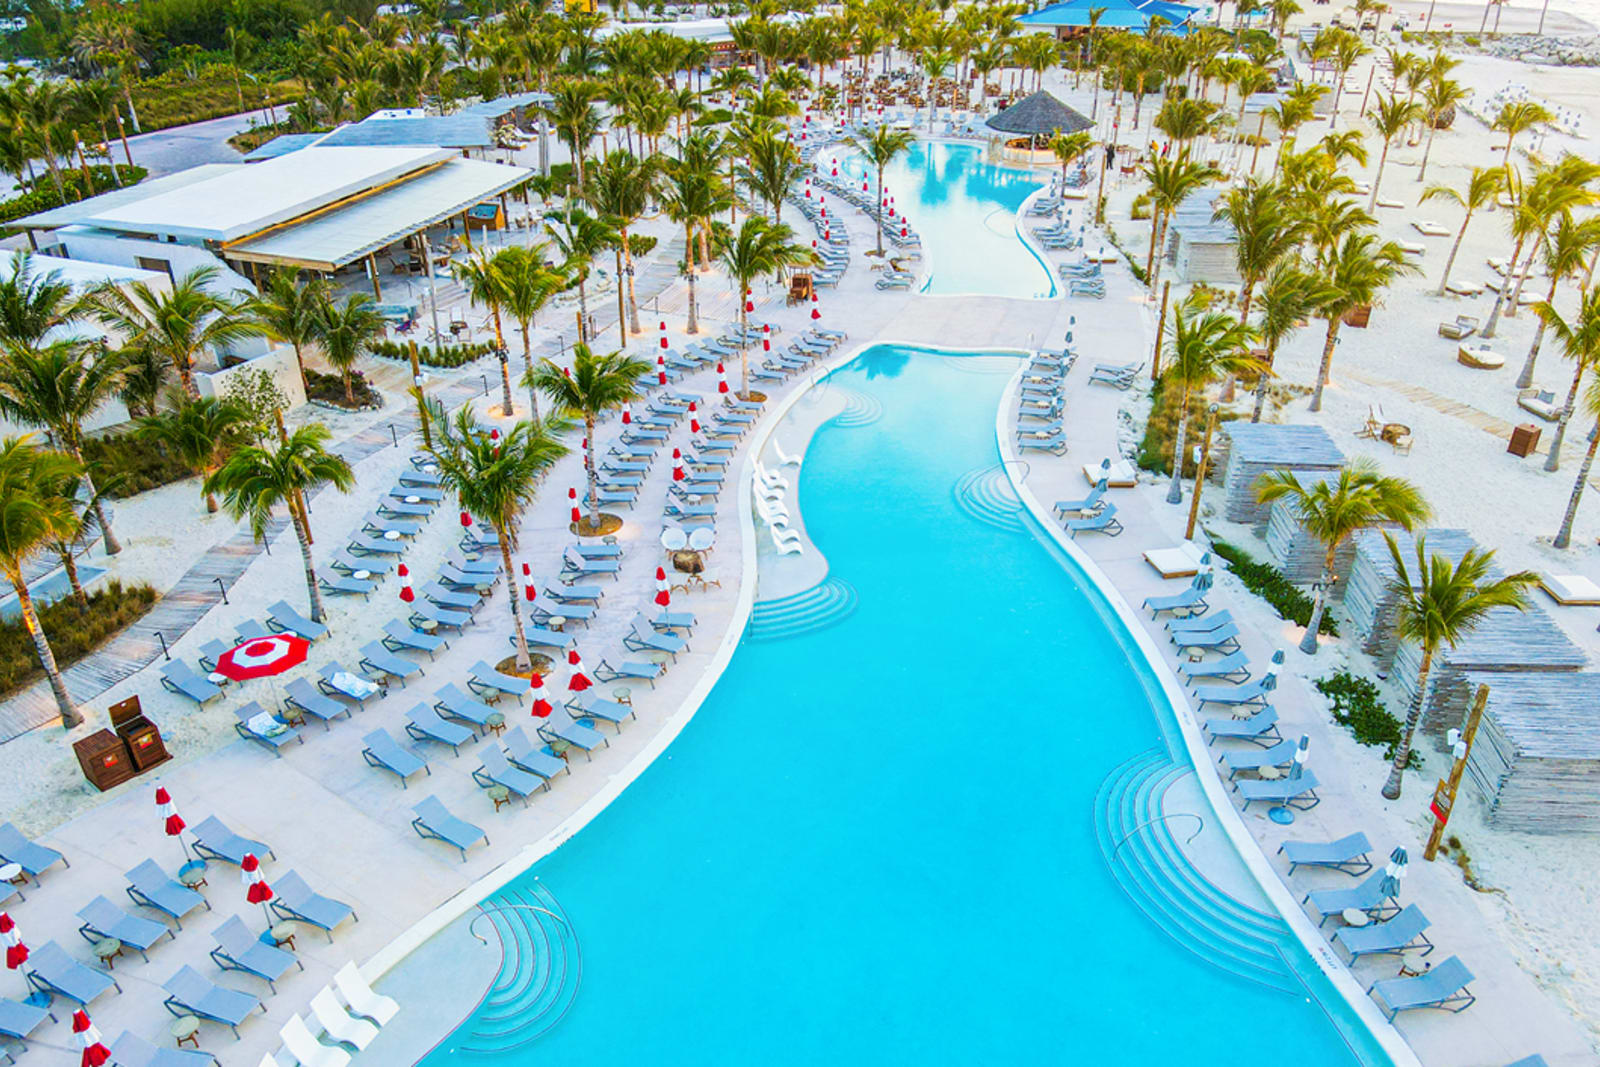 The pool at the adults-only Bimini Beach Club